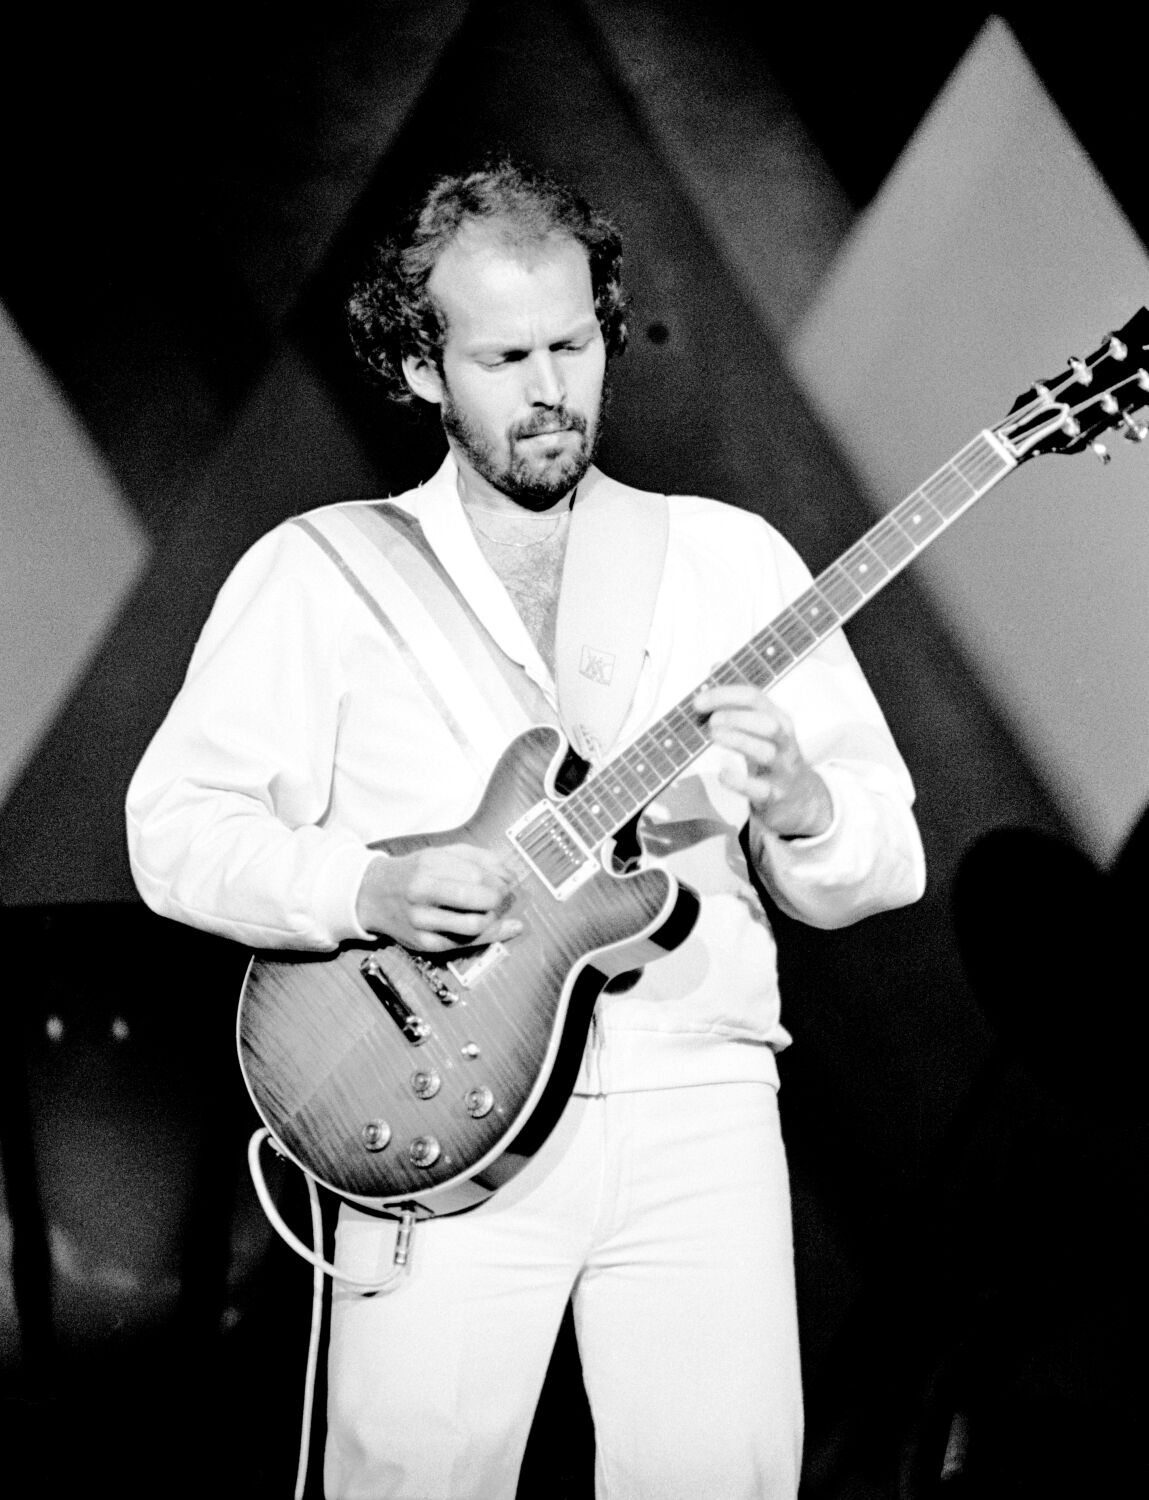 Lasse Wellander, guitarist who played 'integral role in the ABBA story,' dies at 70